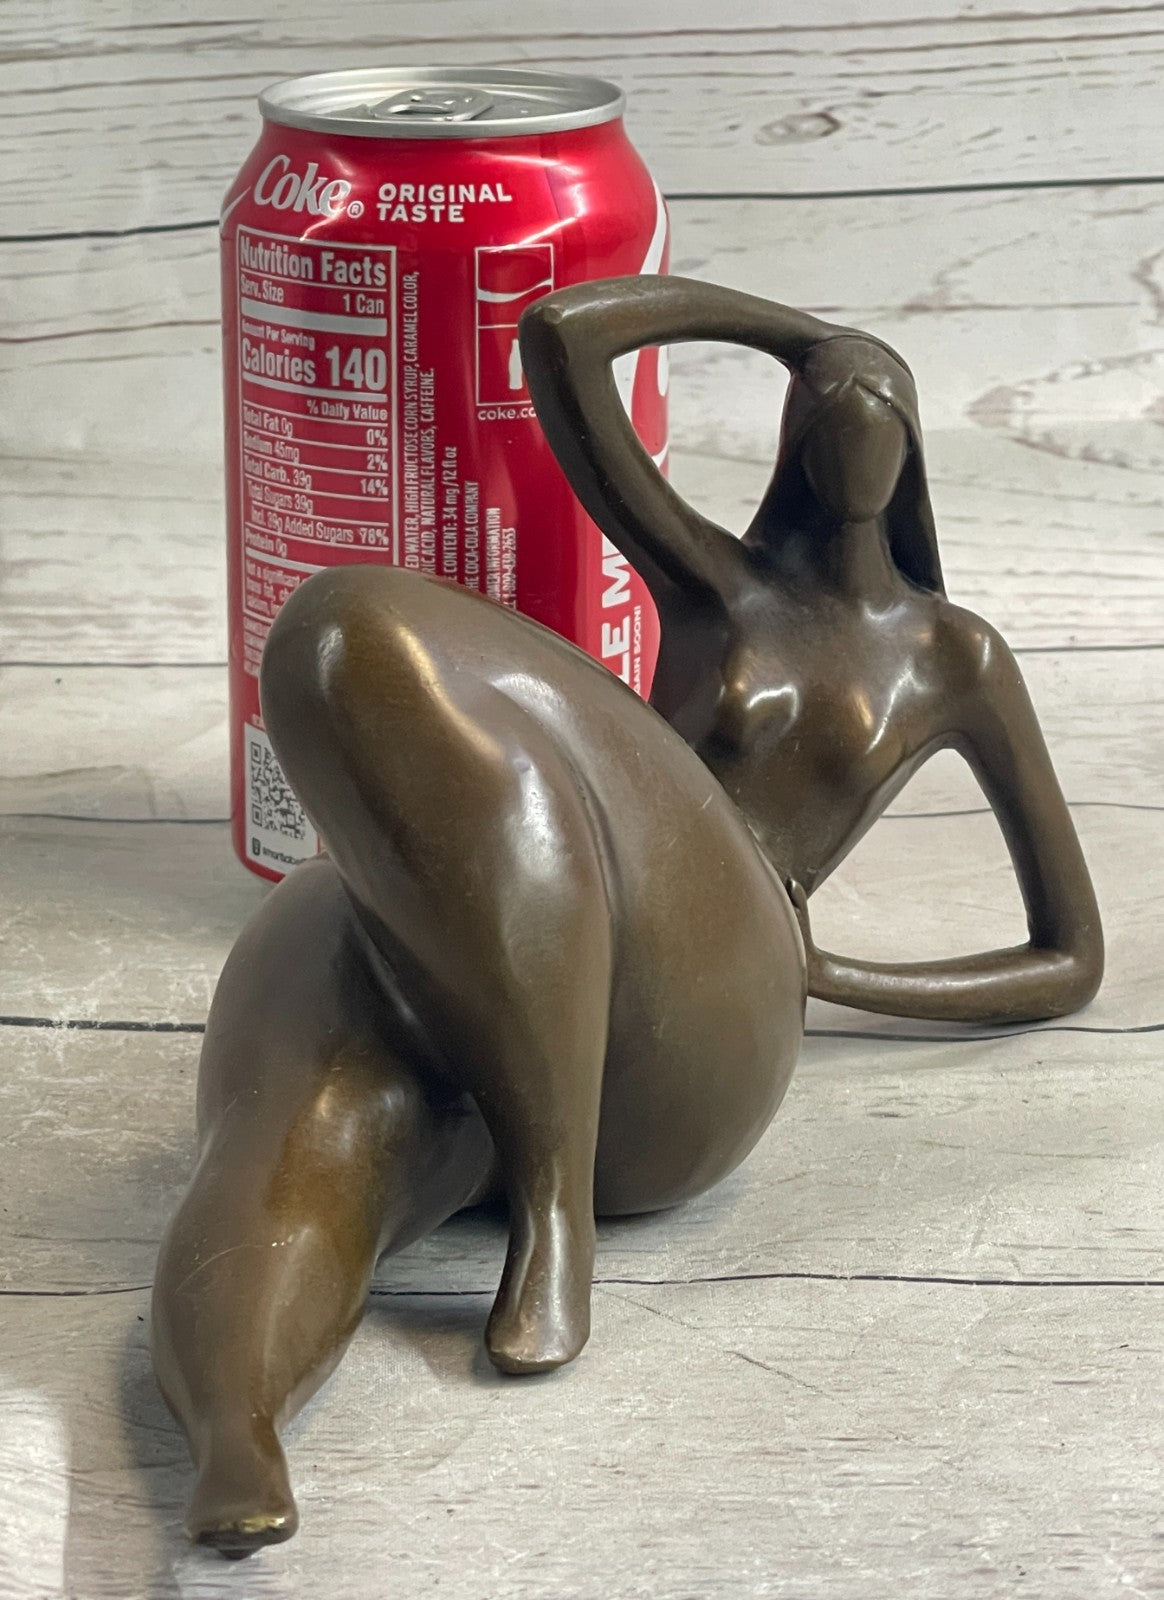 Exquisite Home Office Decor: Handmade Bronze Sculpture by Mario Nick, Classic Nude Woman